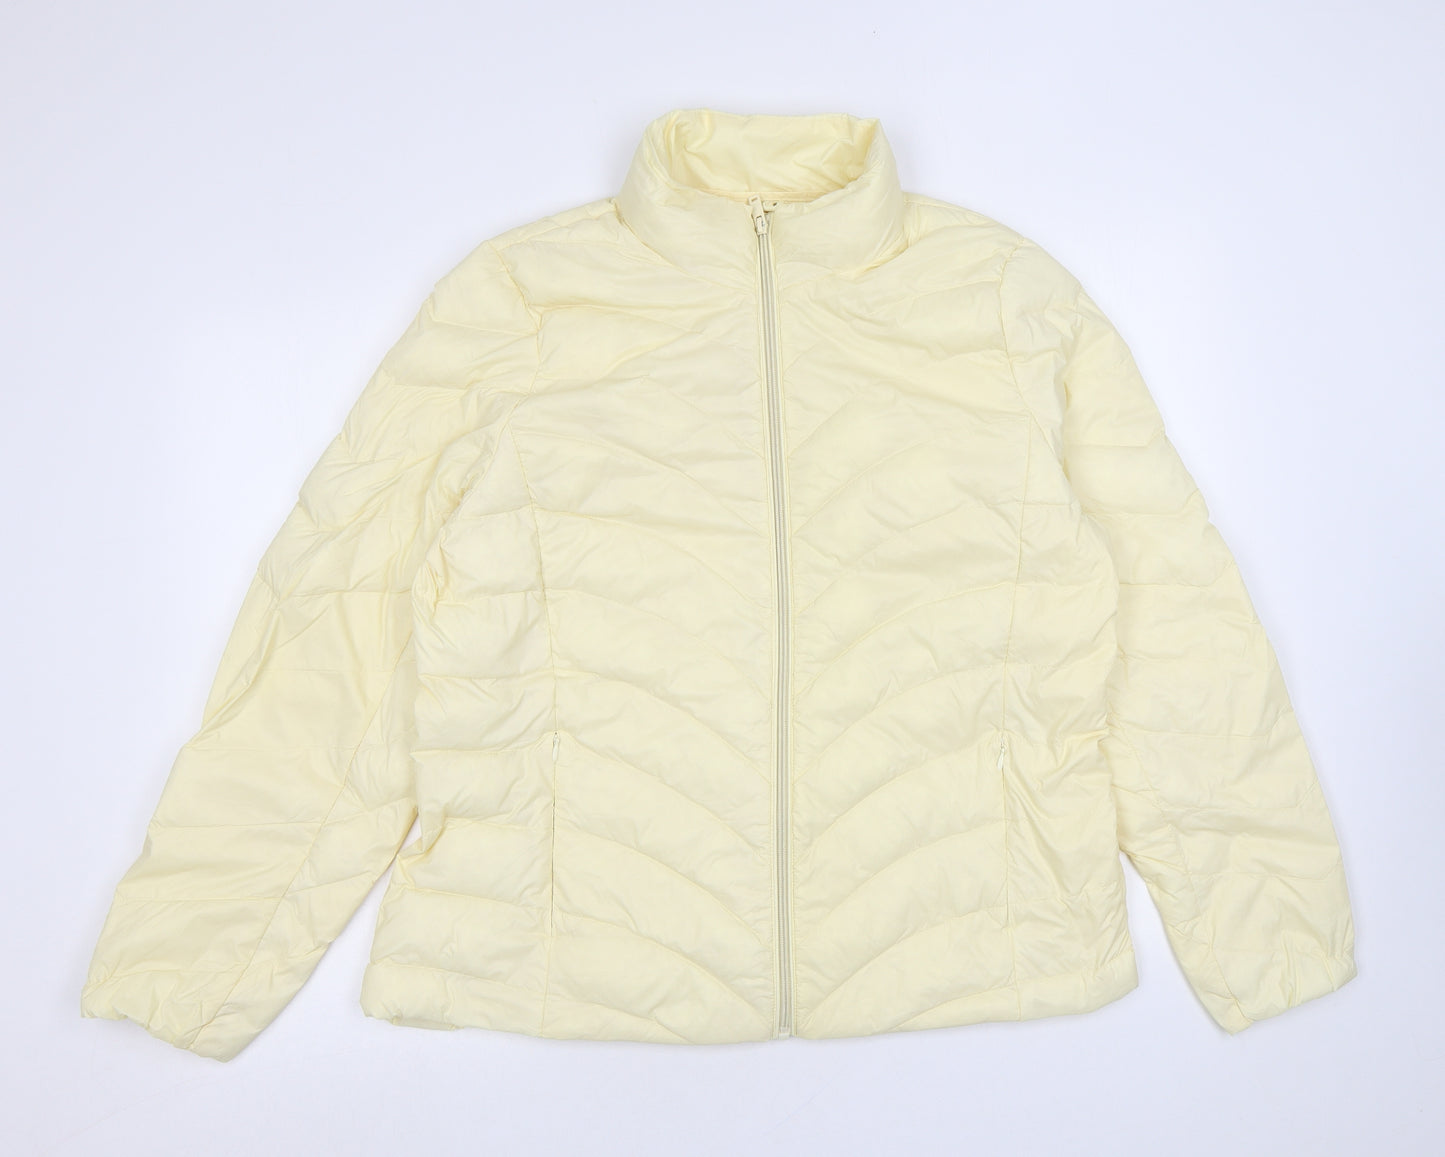 Marks and Spencer Womens Yellow Jacket Size 16 Zip